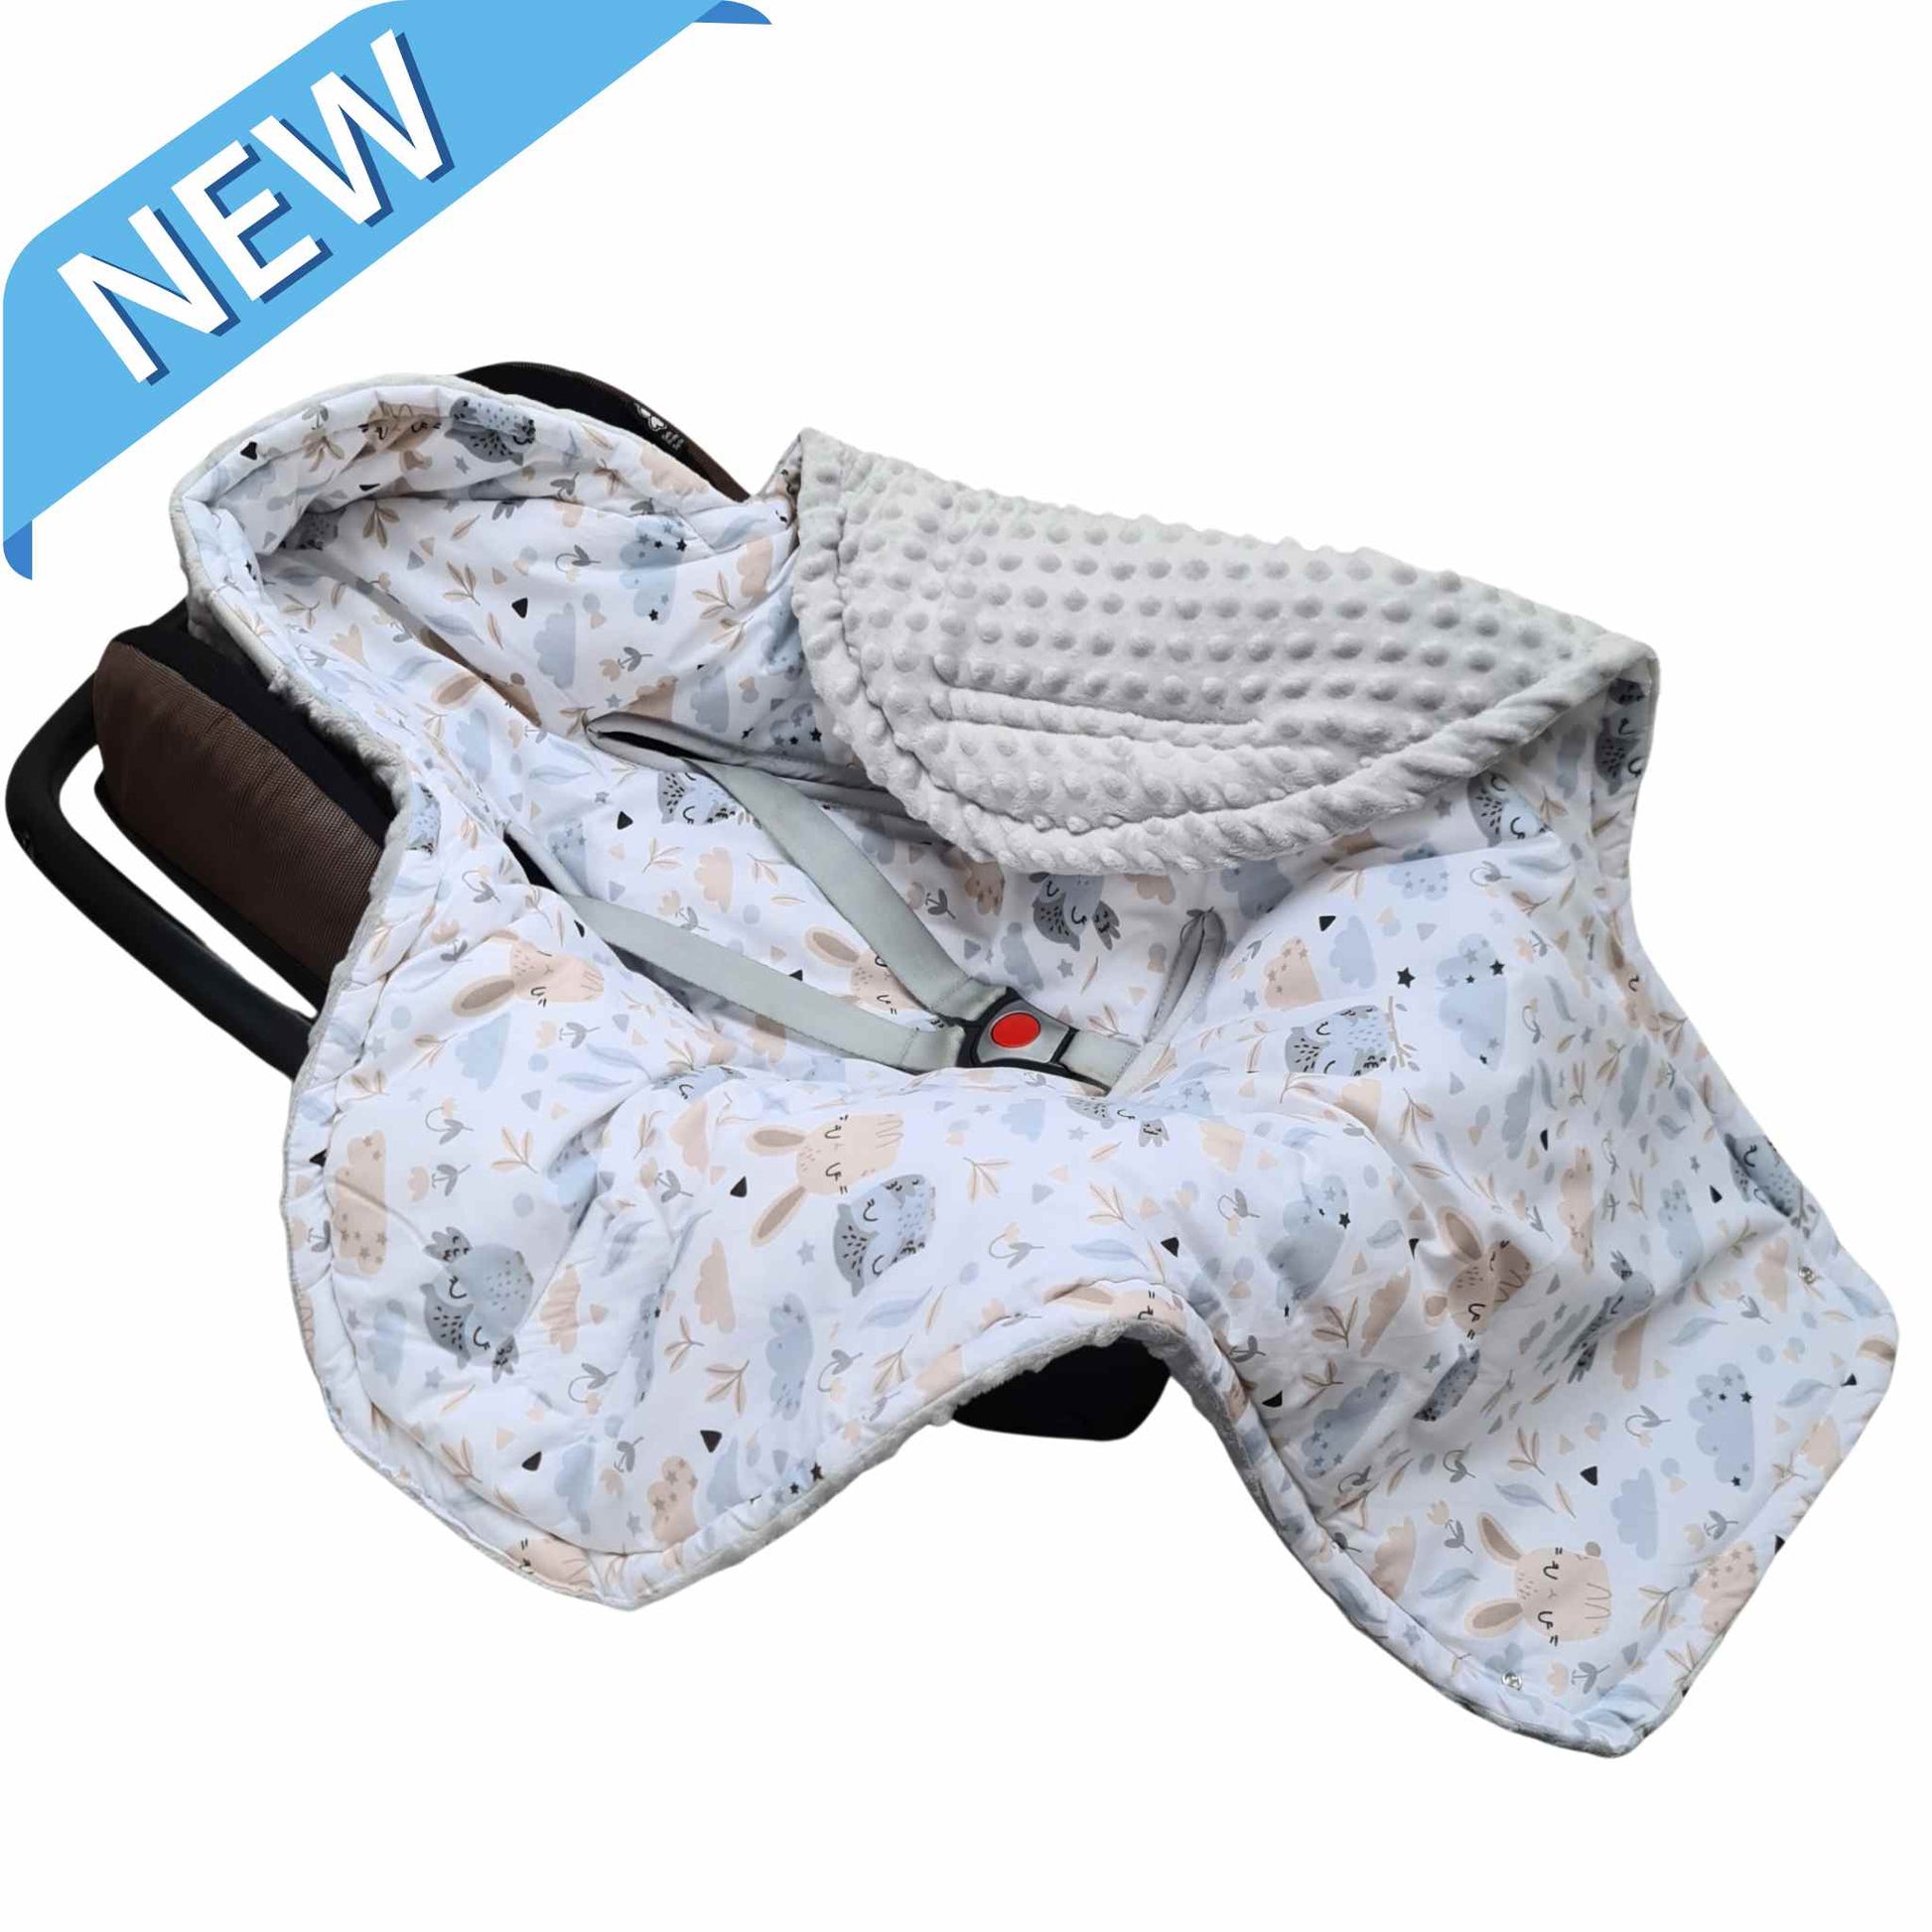 Universal car seat blanket infants 0-12 months owls bunnies pattern with grey plush